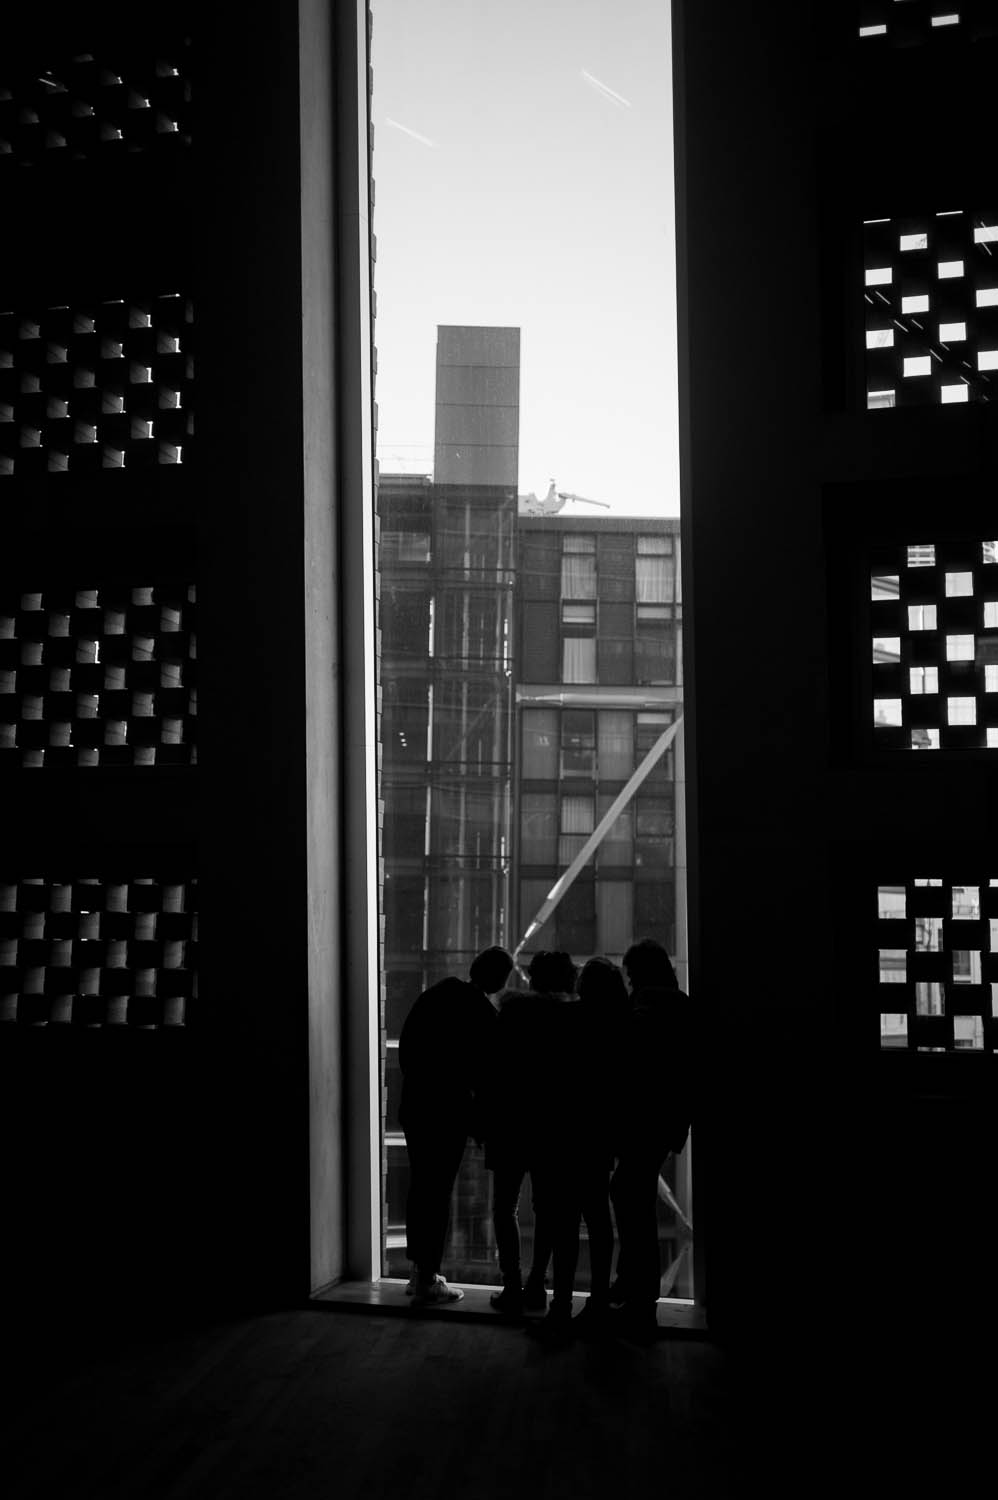 A group of children look through a tall window at the Tate Modern museum.